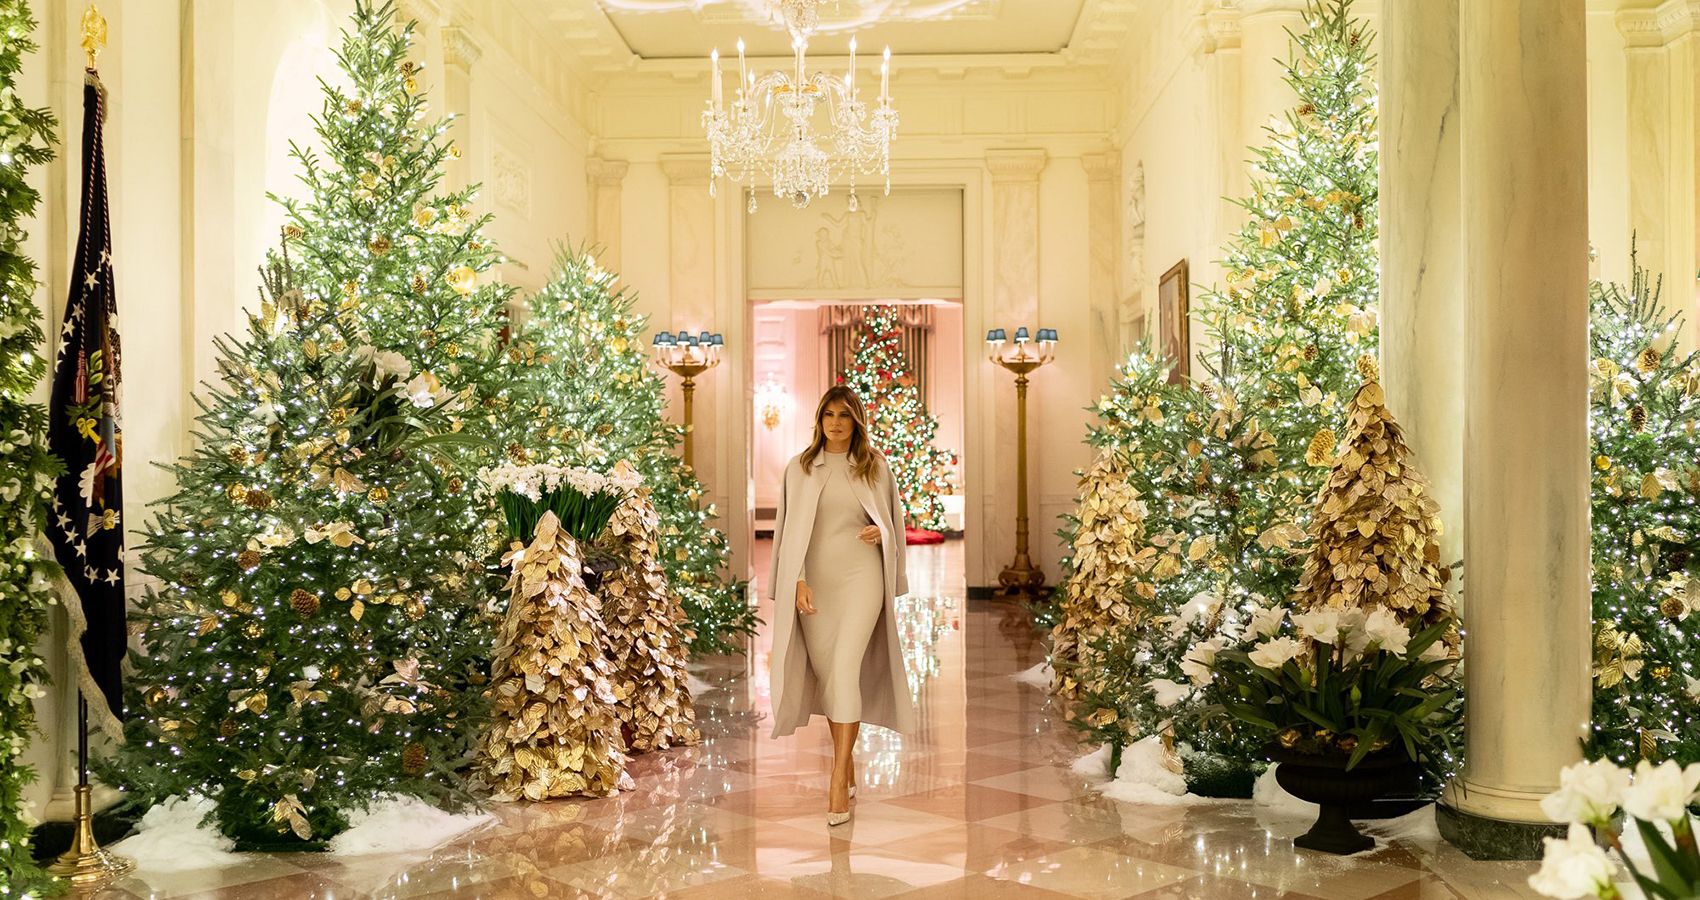 Melania Trump with Christmas trees in the White House